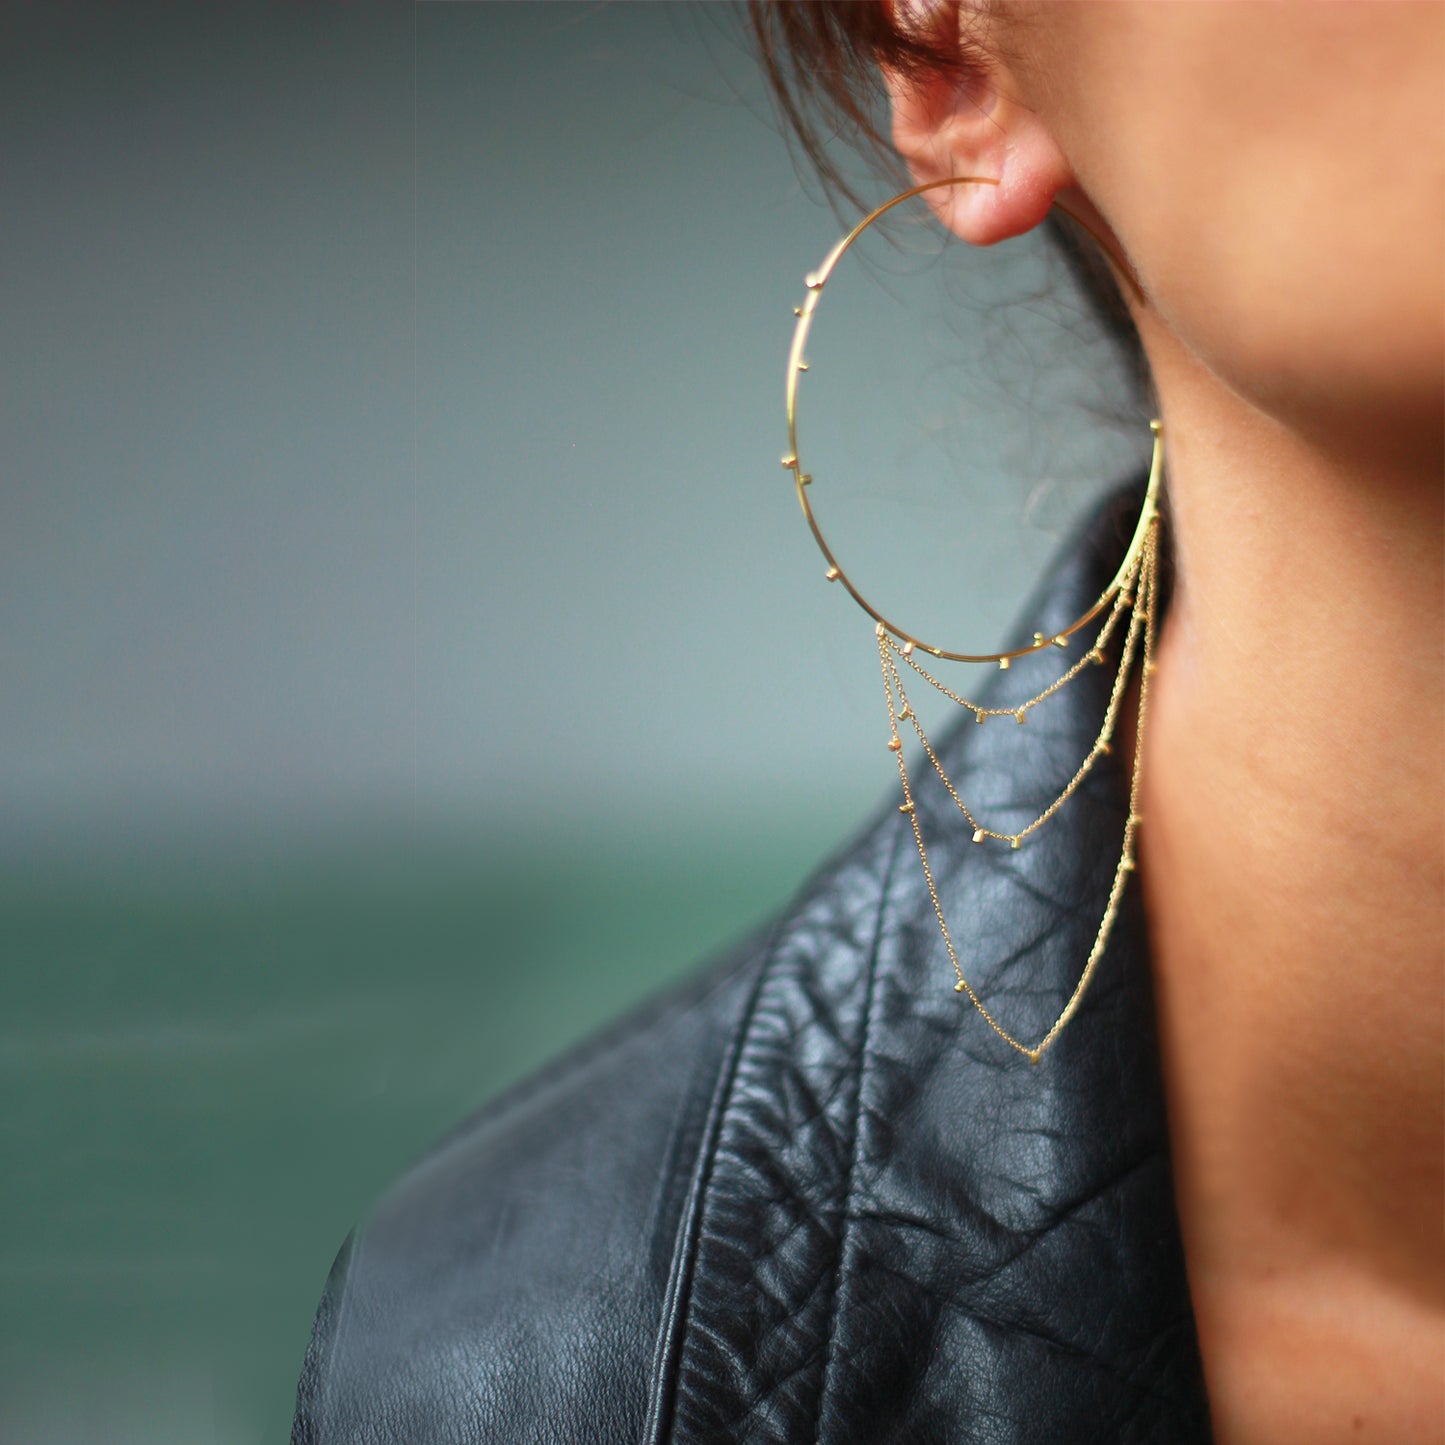 These fabulous large 18ct yellow hoop earrings with layers of fine chain sprinkled with a shimmering of gold embellishments are part of Gold Dust Collection. Glamourous and chic they are the perfect addition to any outfit on model